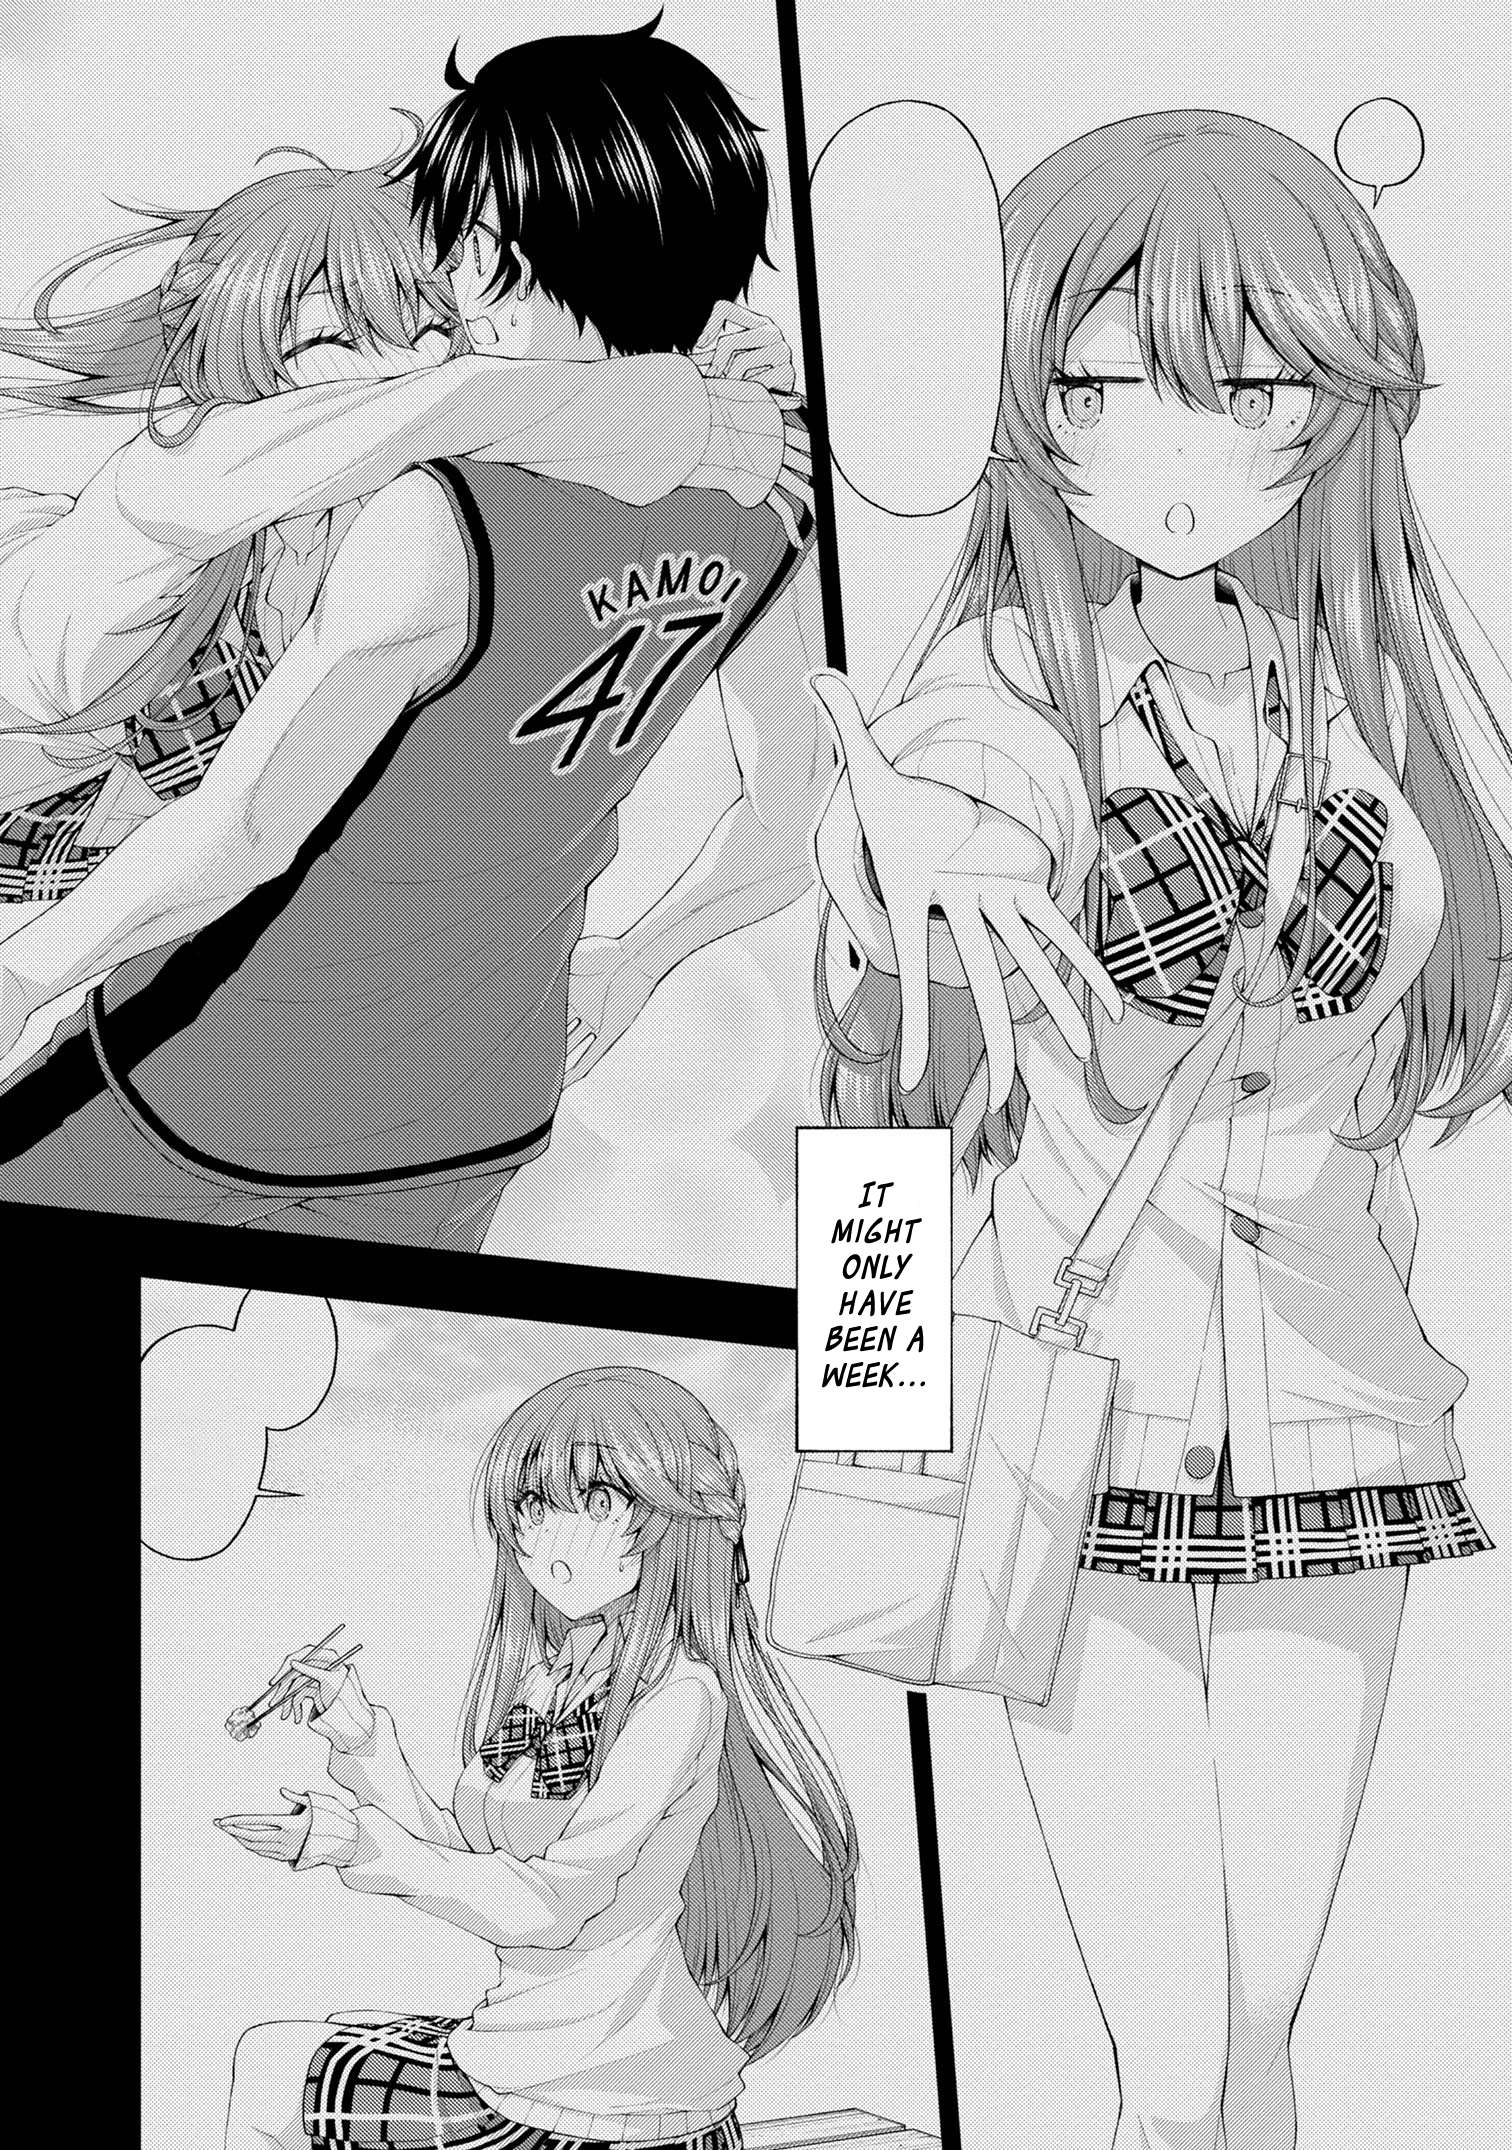 The Gal Who Was Meant to Confess to Me as a Game Punishment - chapter 12 - #4